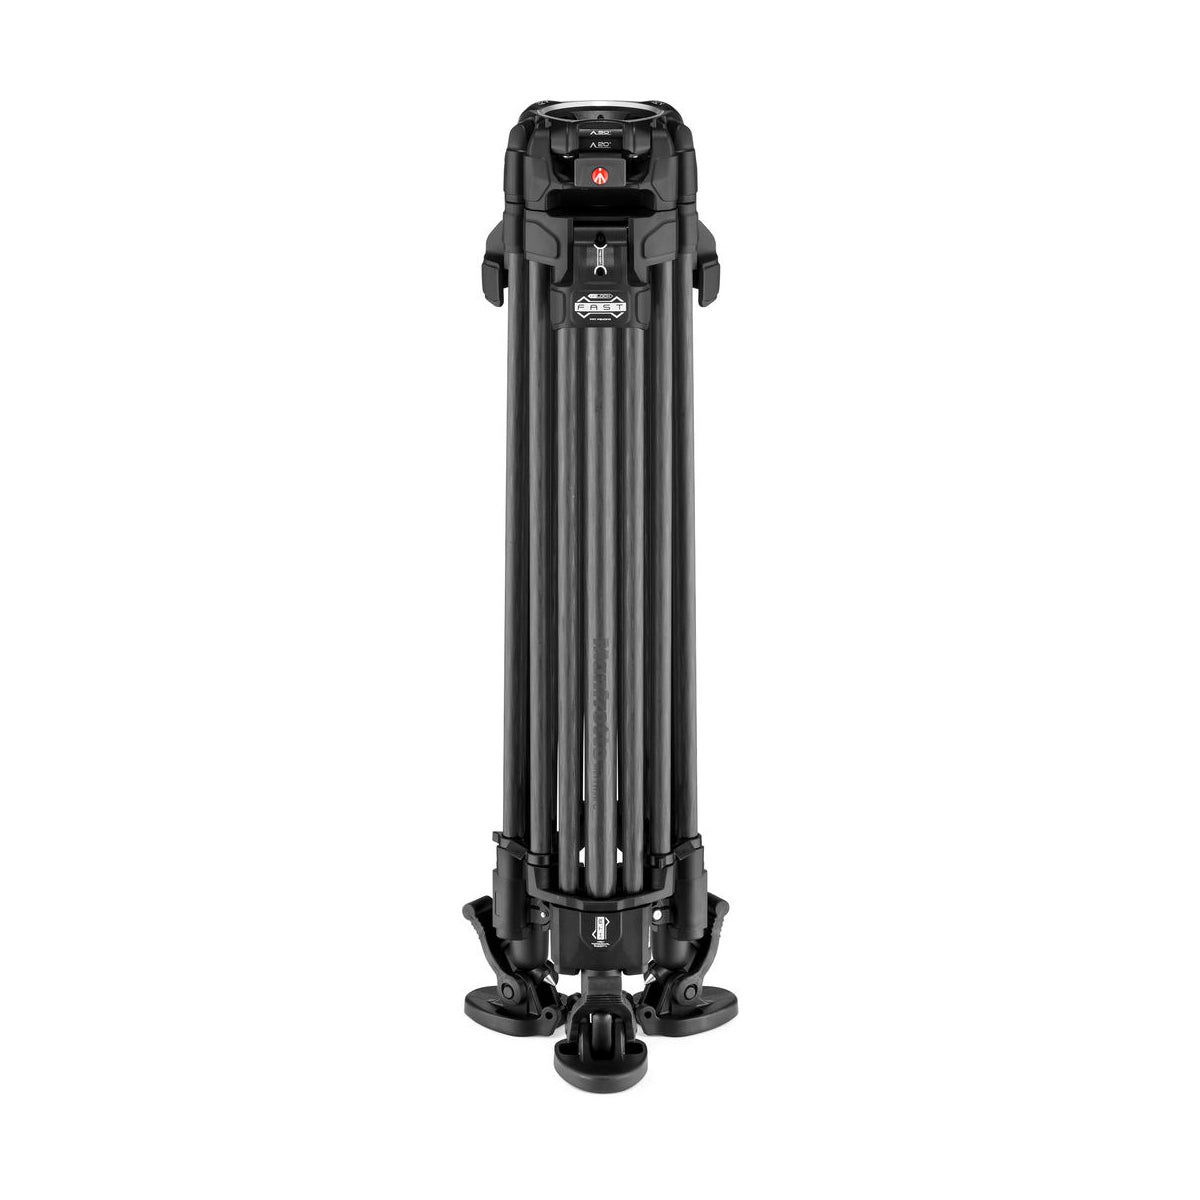 Manfrotto MVK612TWINFCUS Kit with Nitrotech 612 Fluid Head and 645 Fast Twin Leg Carbon Fiber Tripod & Bag